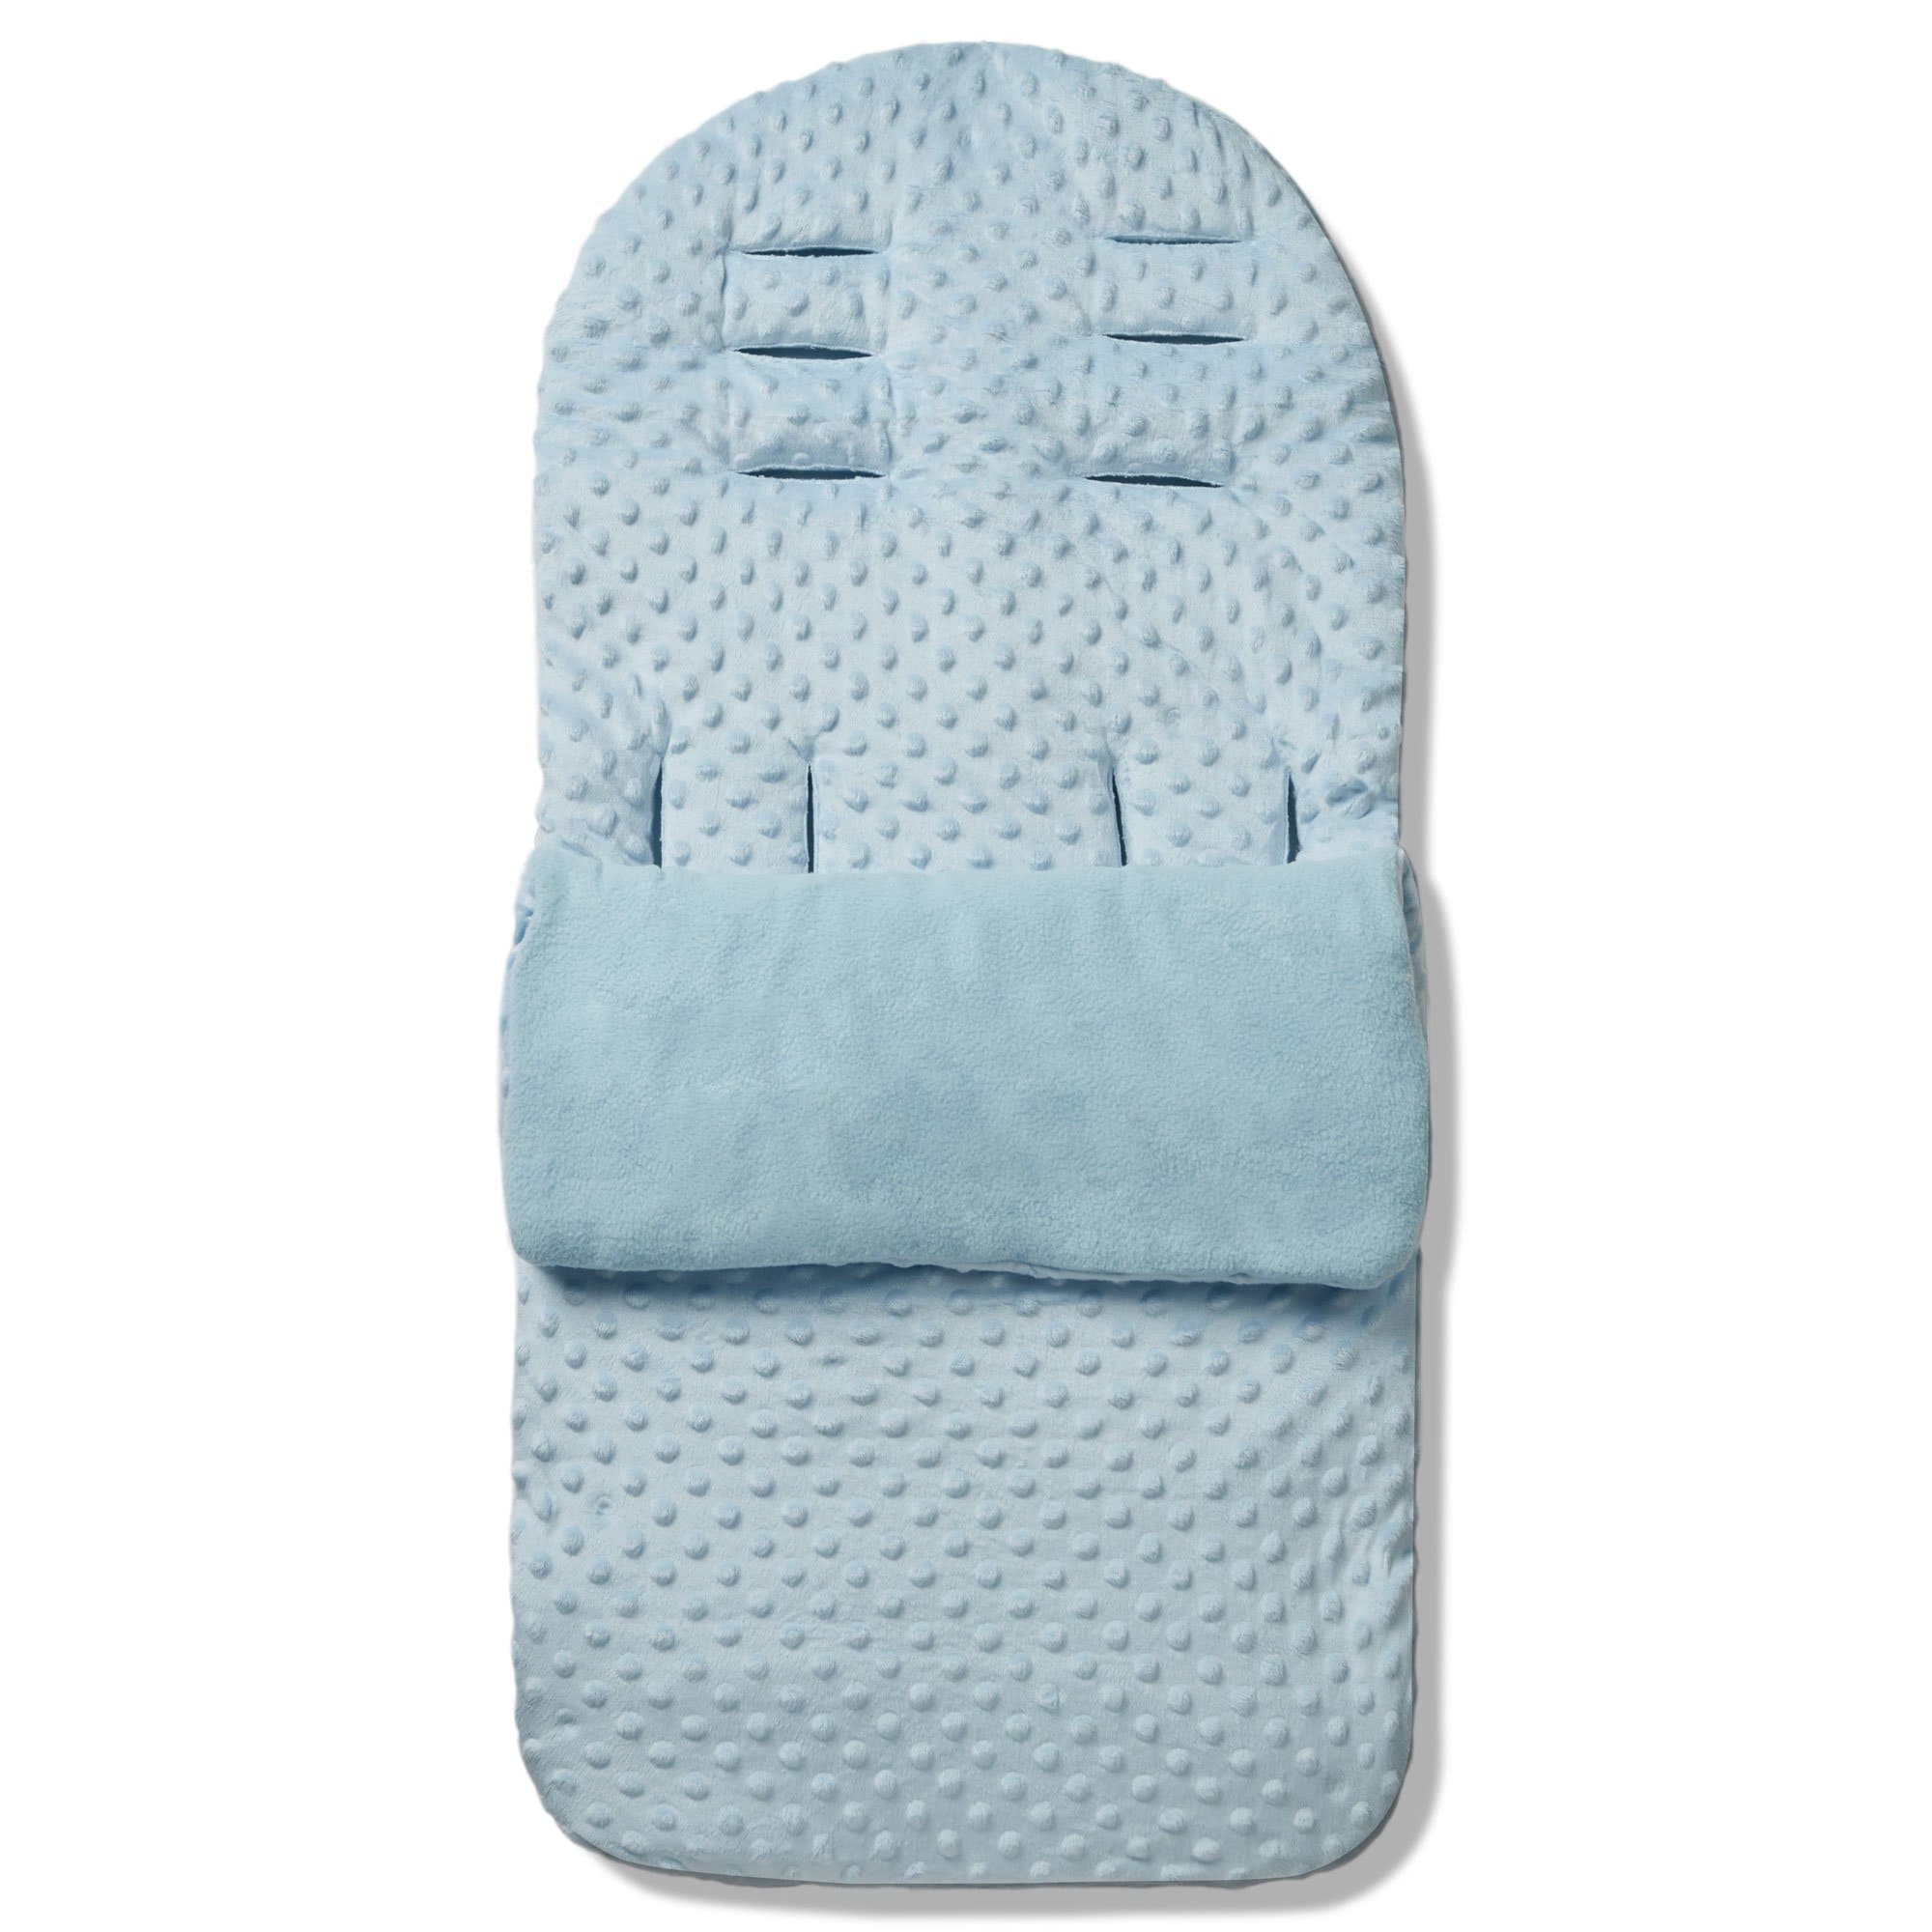 Dimple Footmuff / Cosy Toes Compatible with Firstwheels - Blue / Fits All Models | For Your Little One